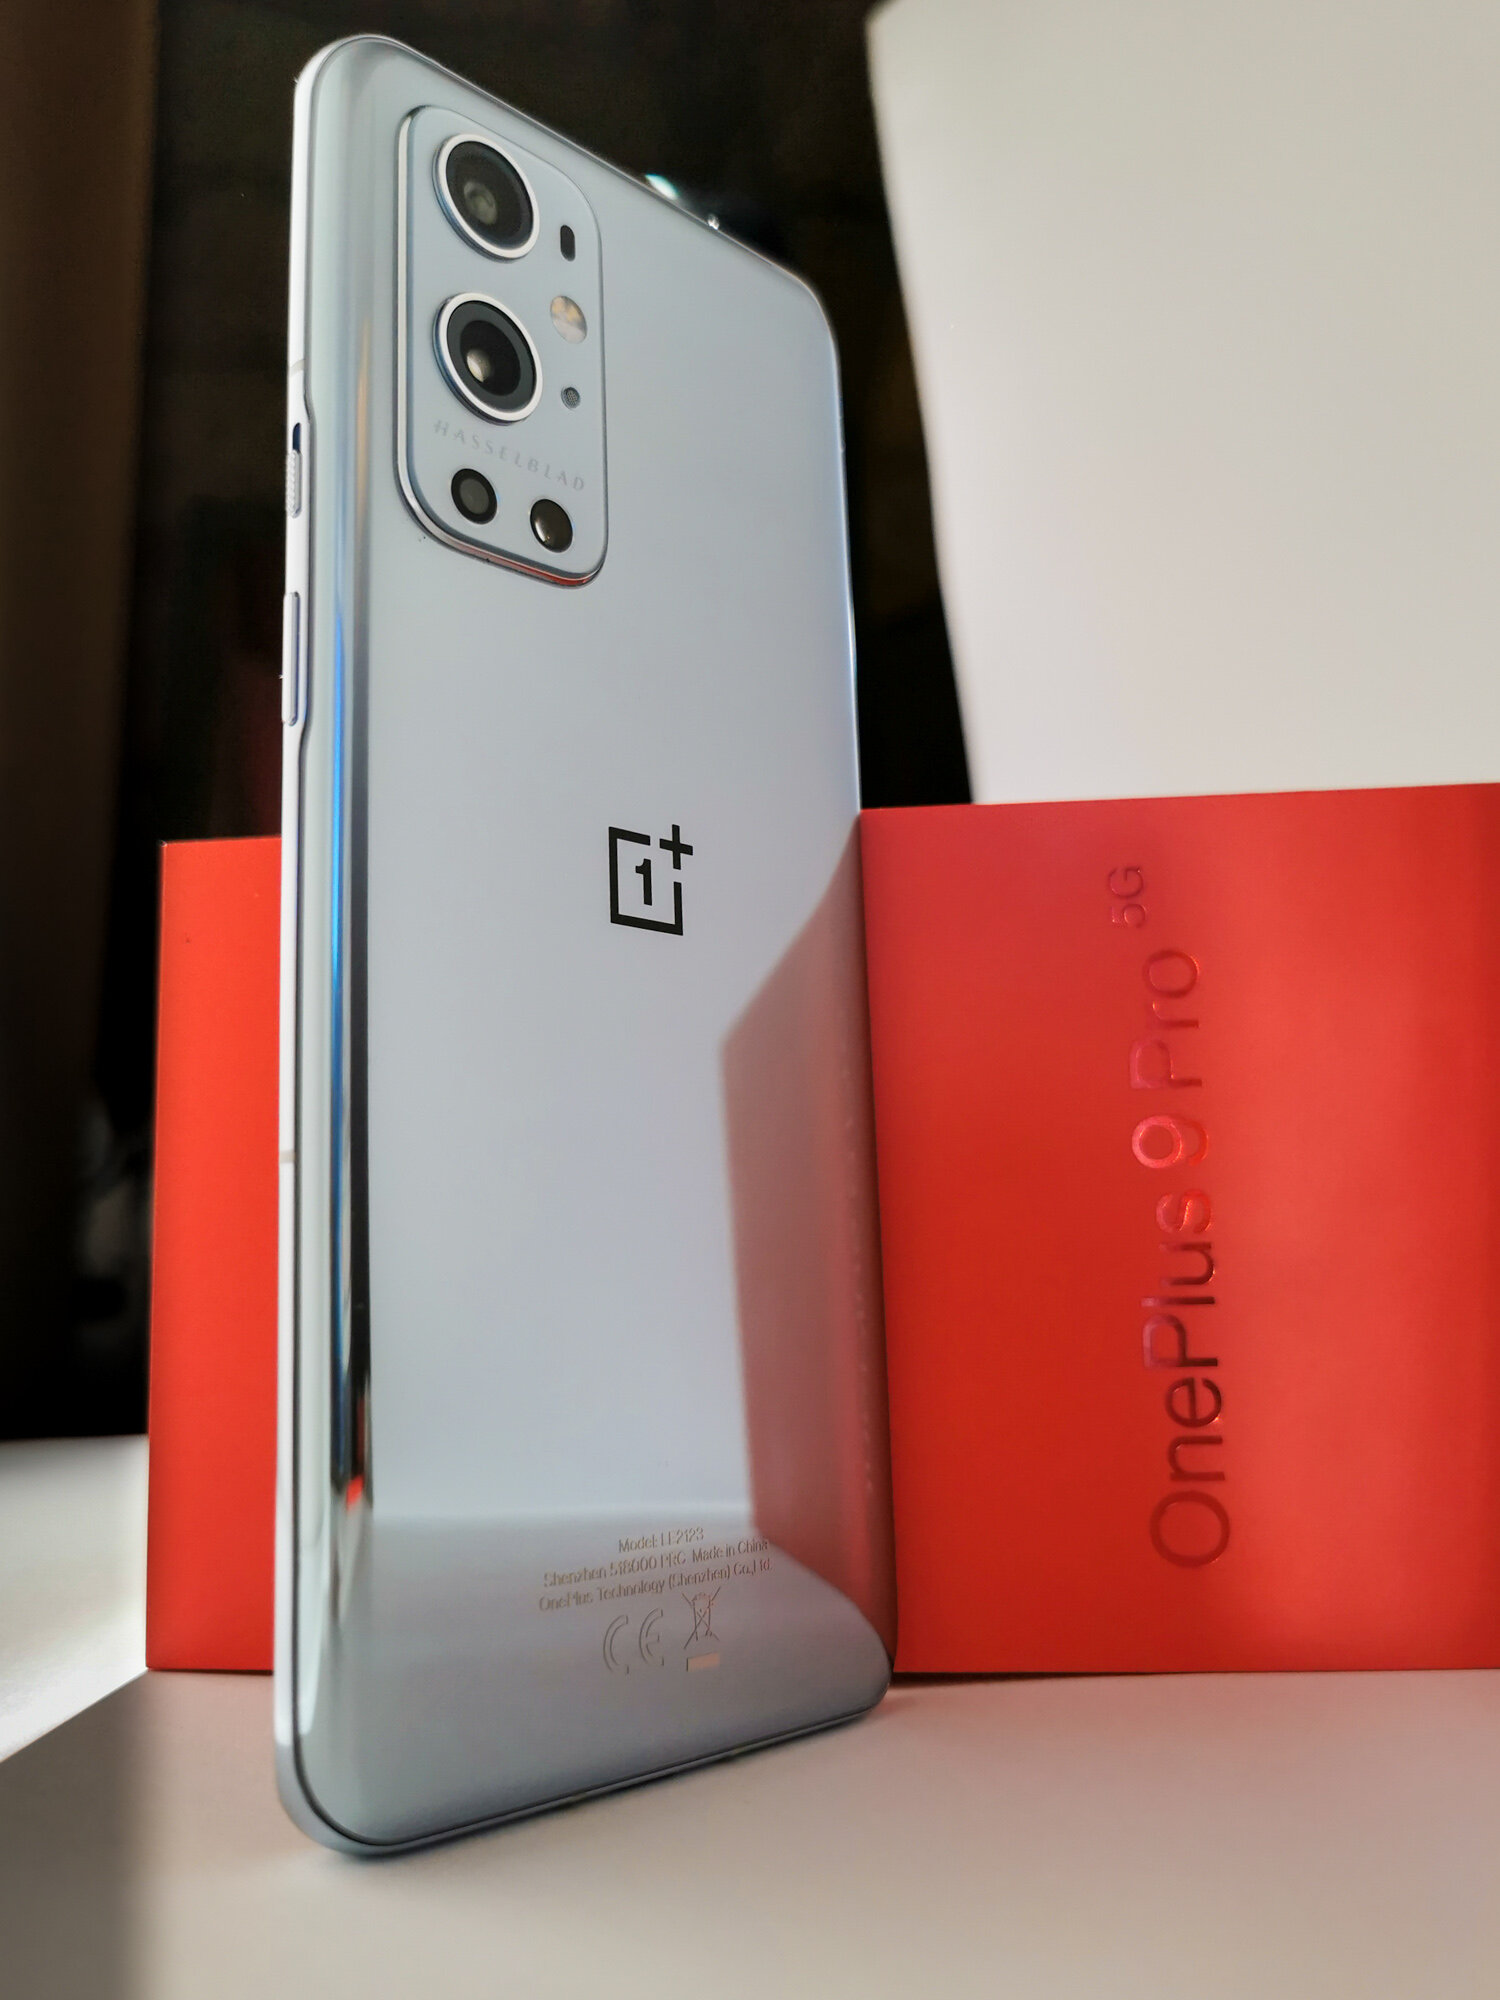 OnePlus 9 Pro review: The Hasselblad camera delivers, but battery life  takes a major hit